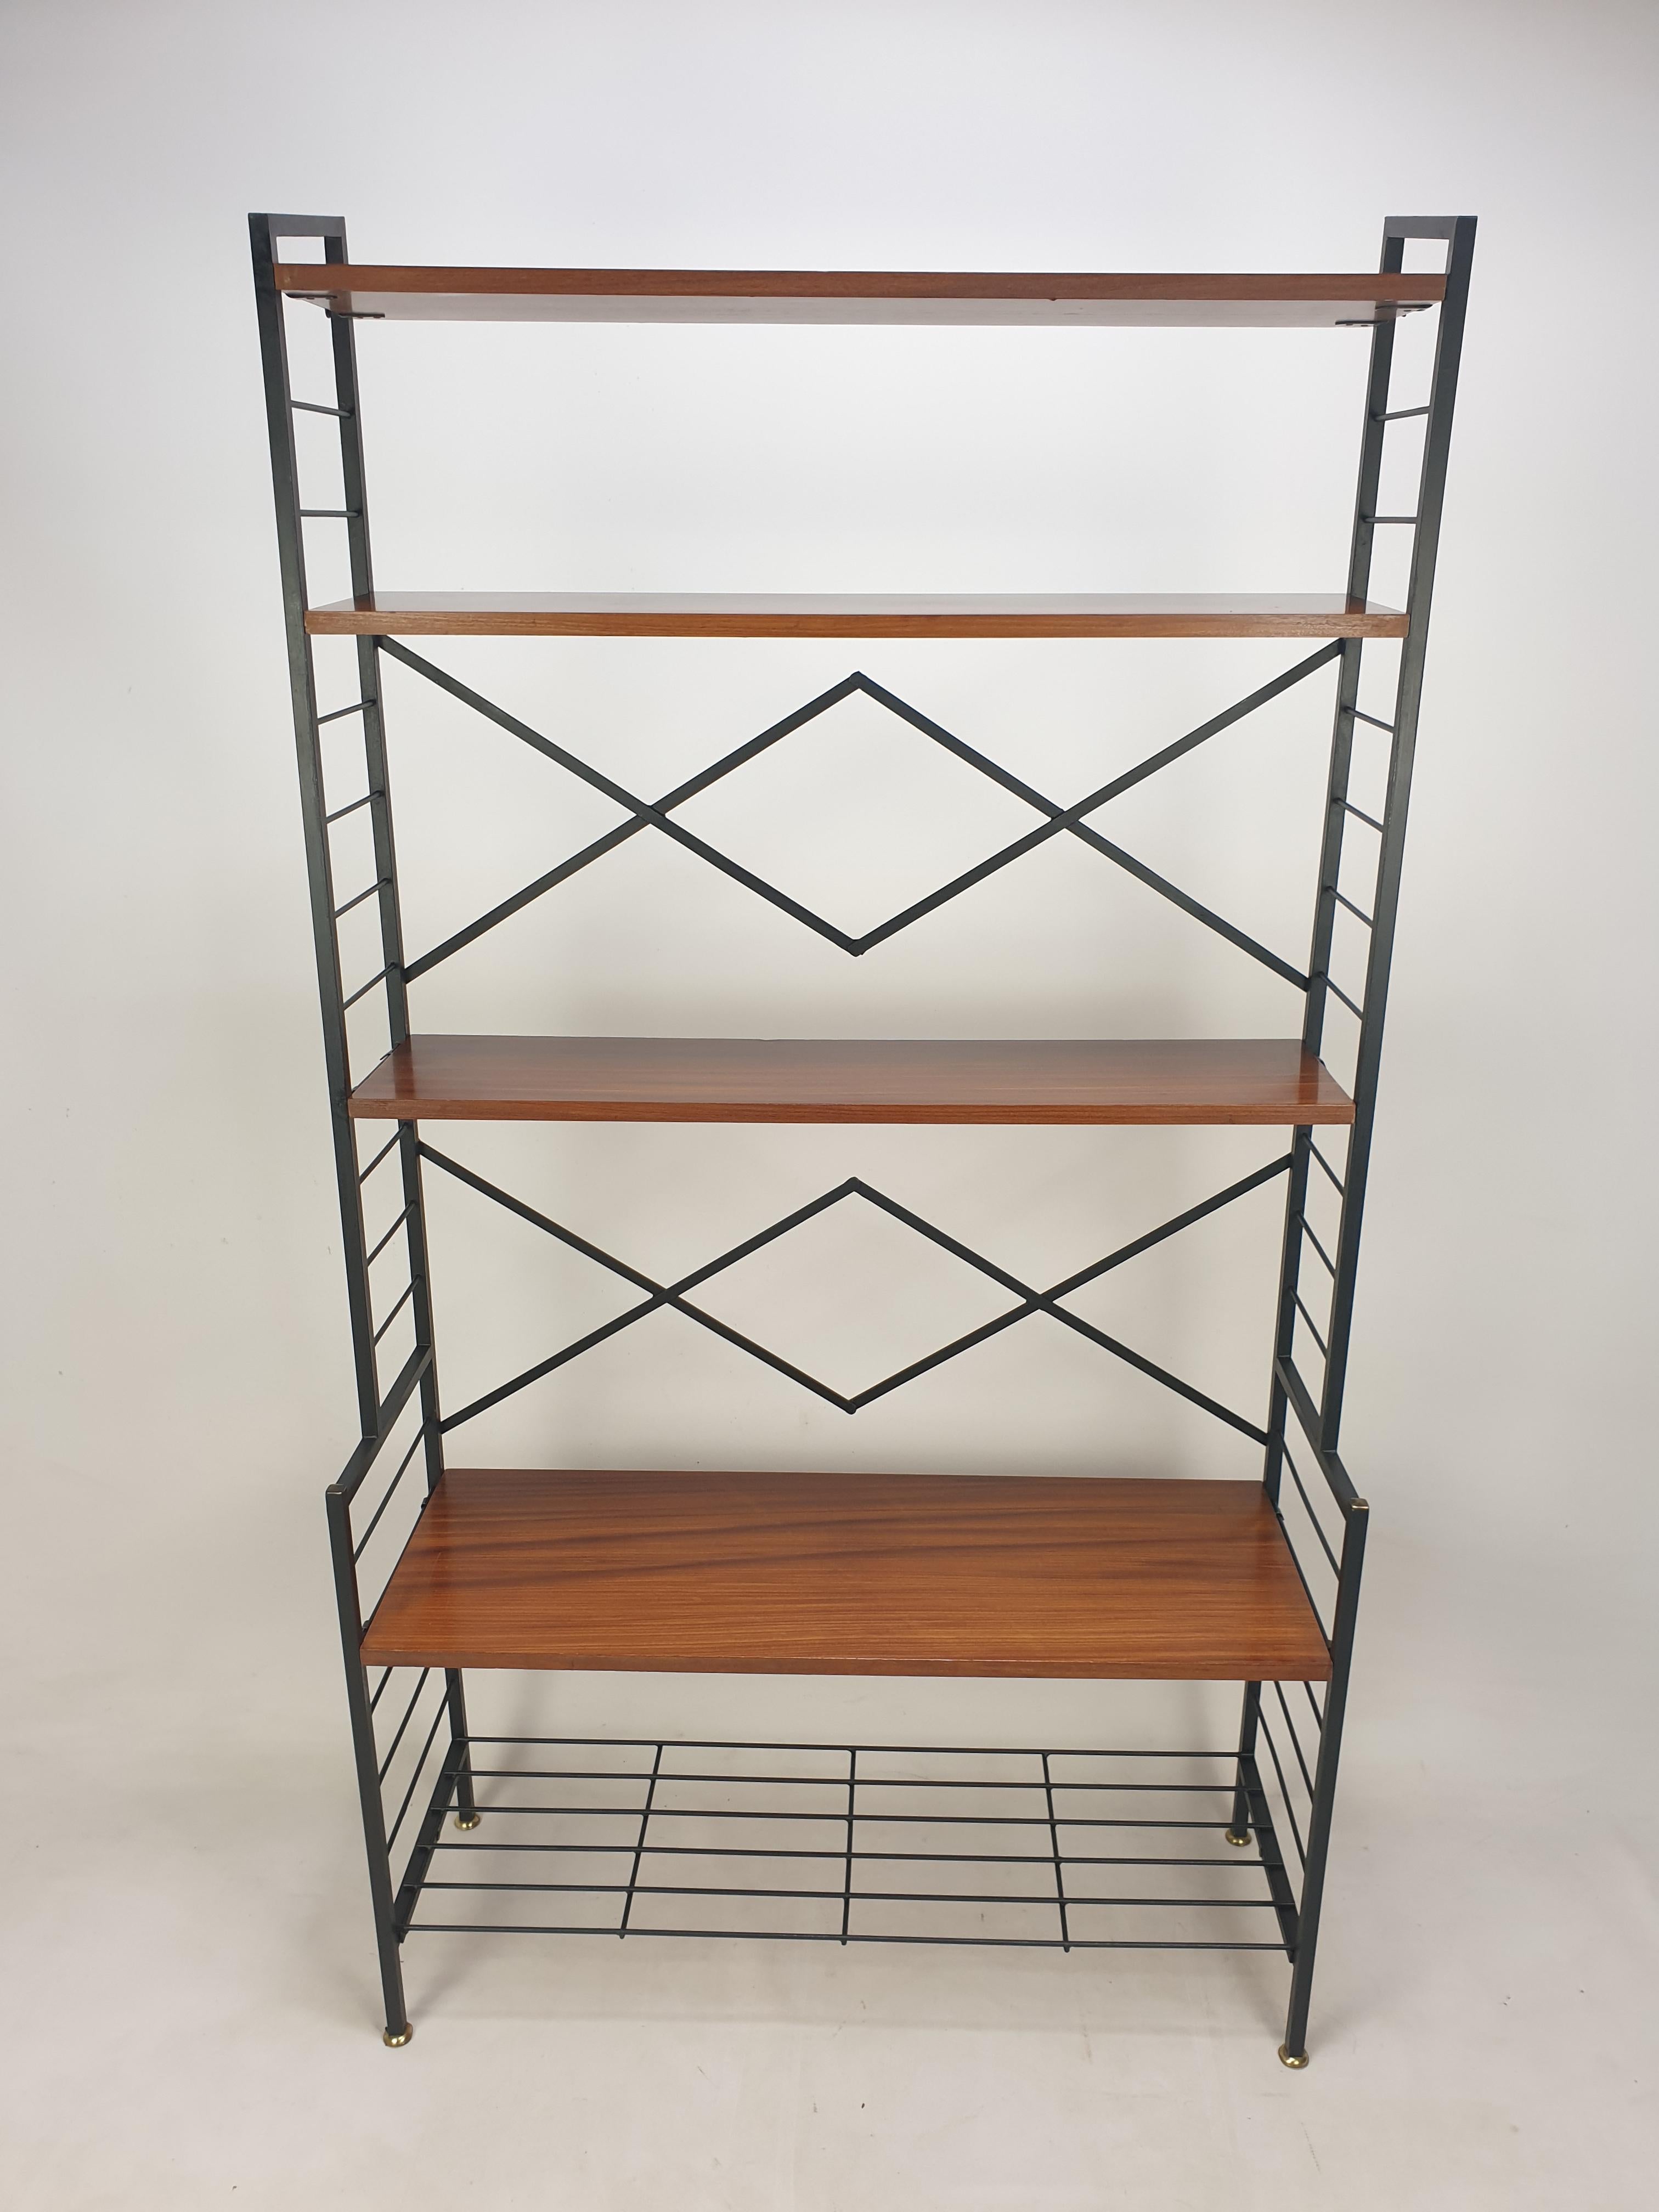 Very nice free standing shelve system, fabricated in Italy in the 50's.

4 wooden (teak veneer) shelves with a black painted metal system.

It is very easy to disassemble.